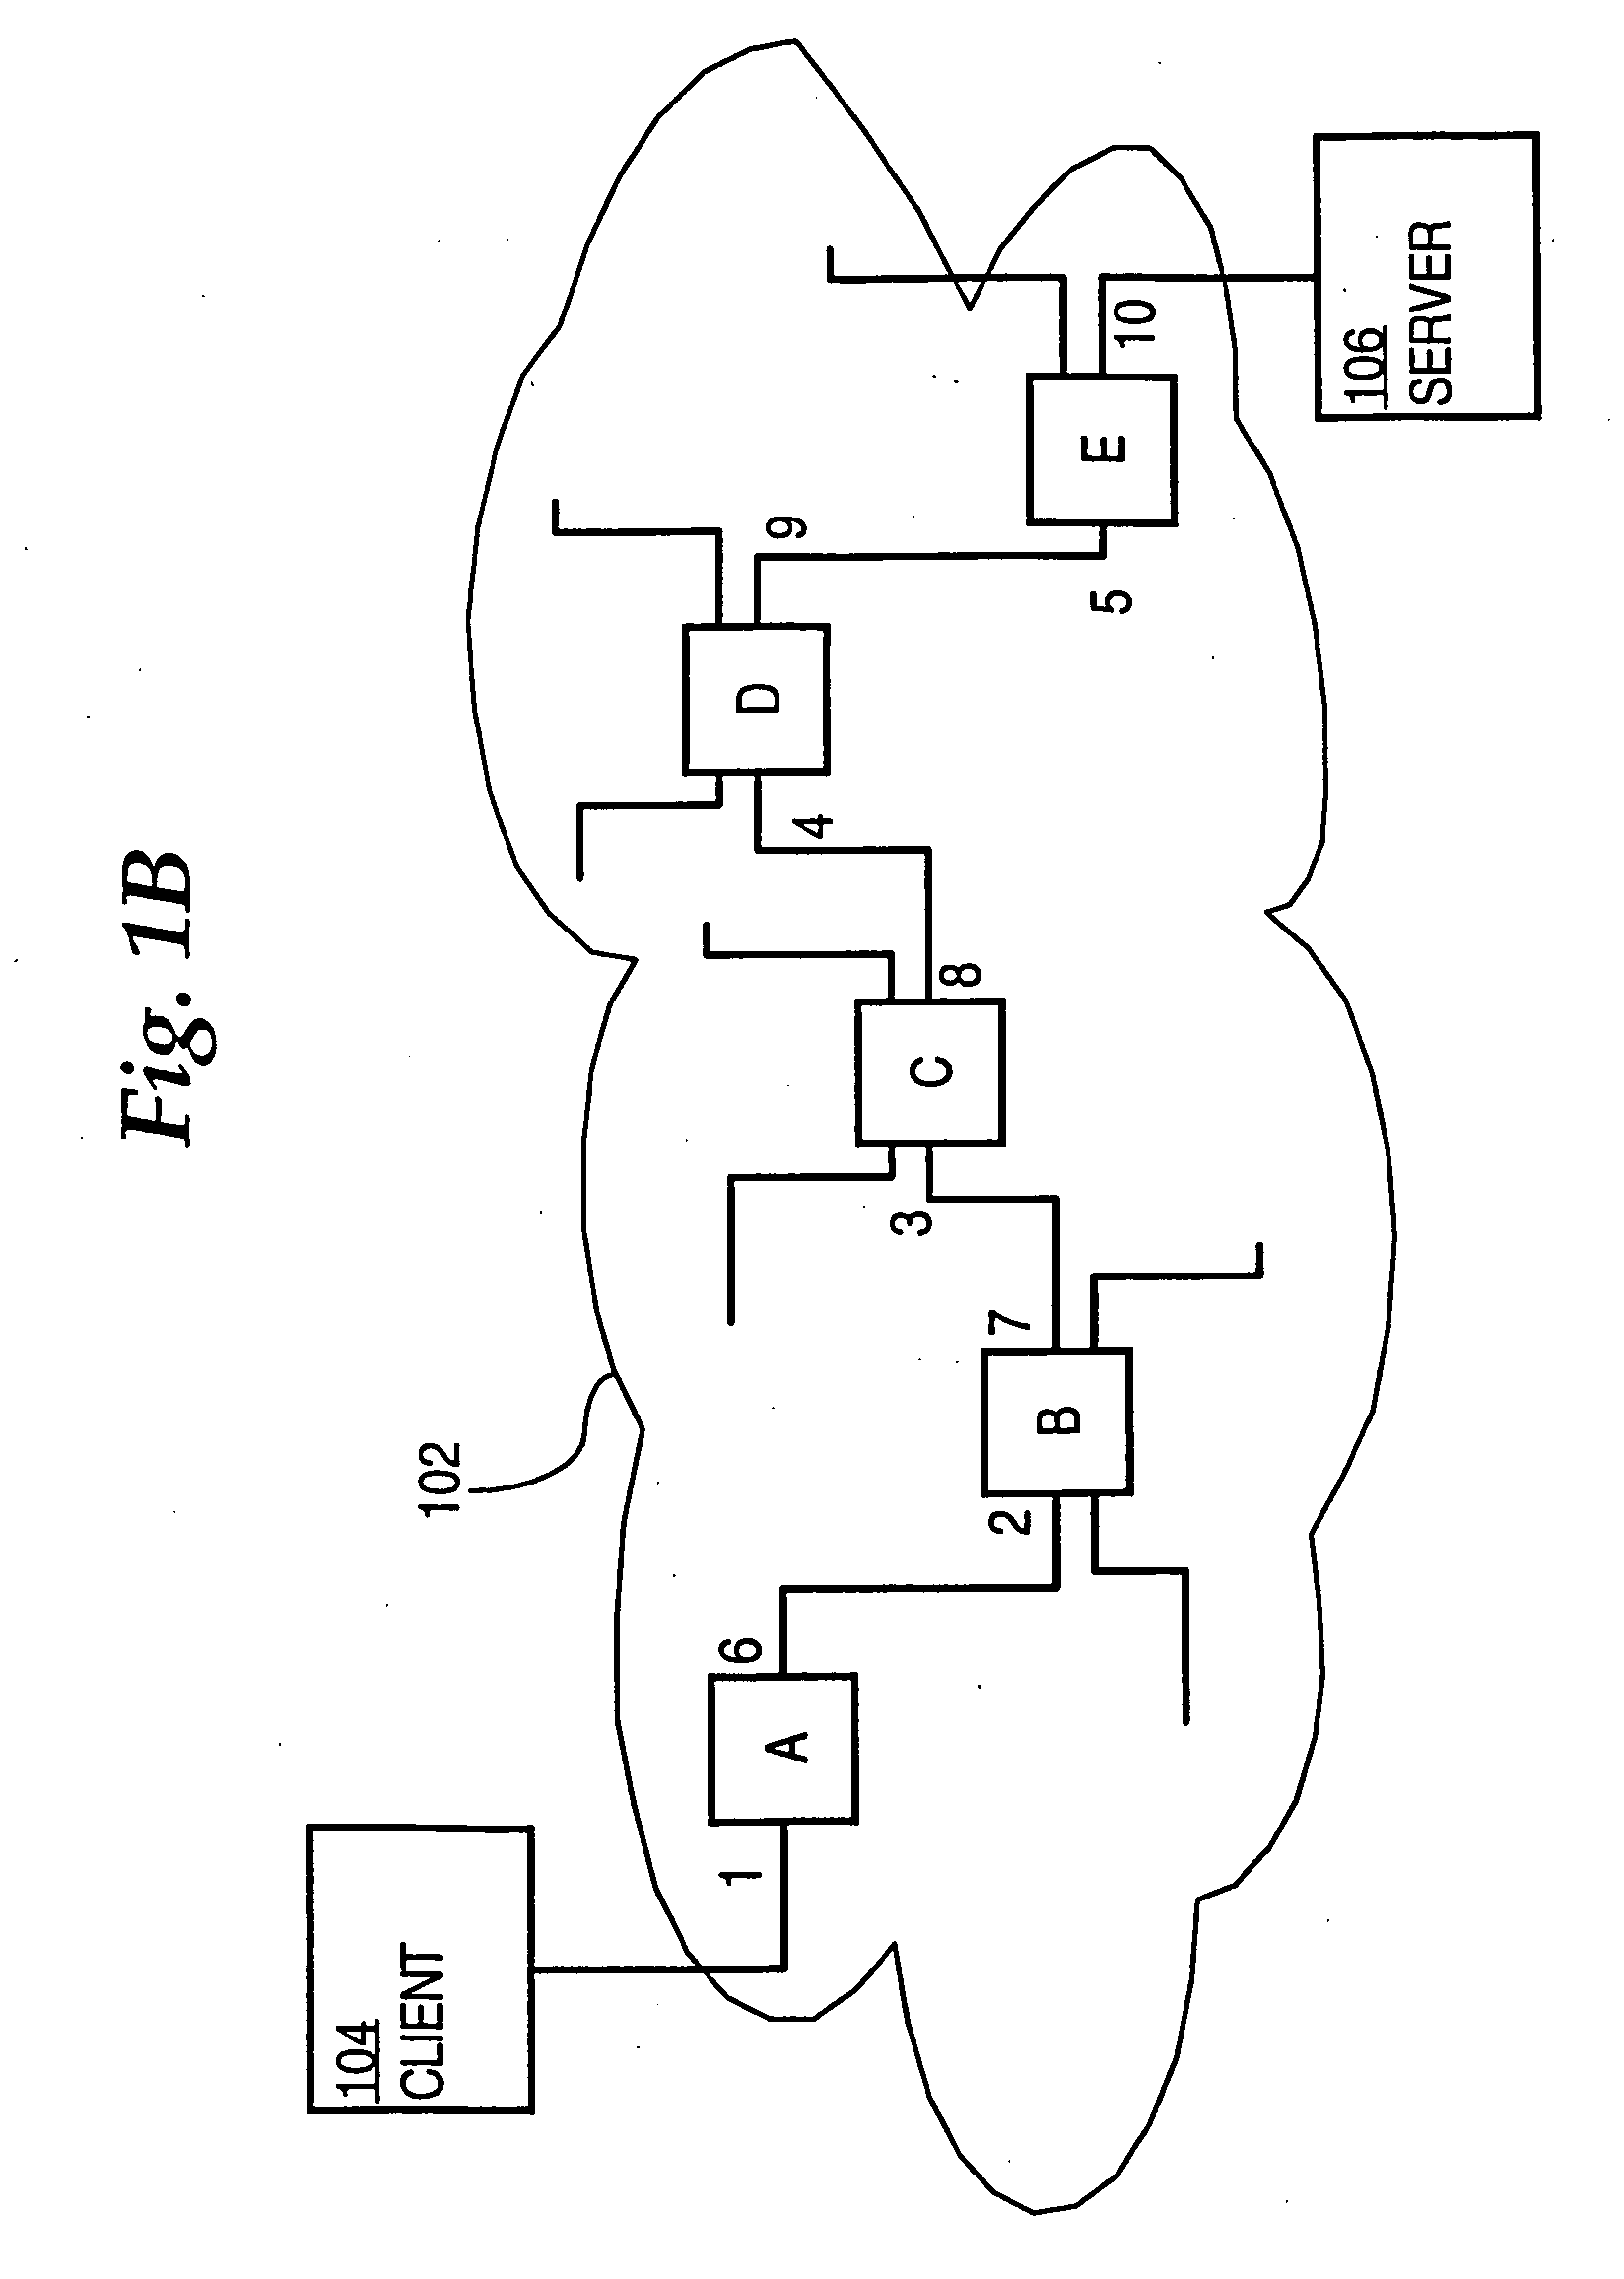 Method and apparatus for routing data to a load balanced server using MPLS packet labels